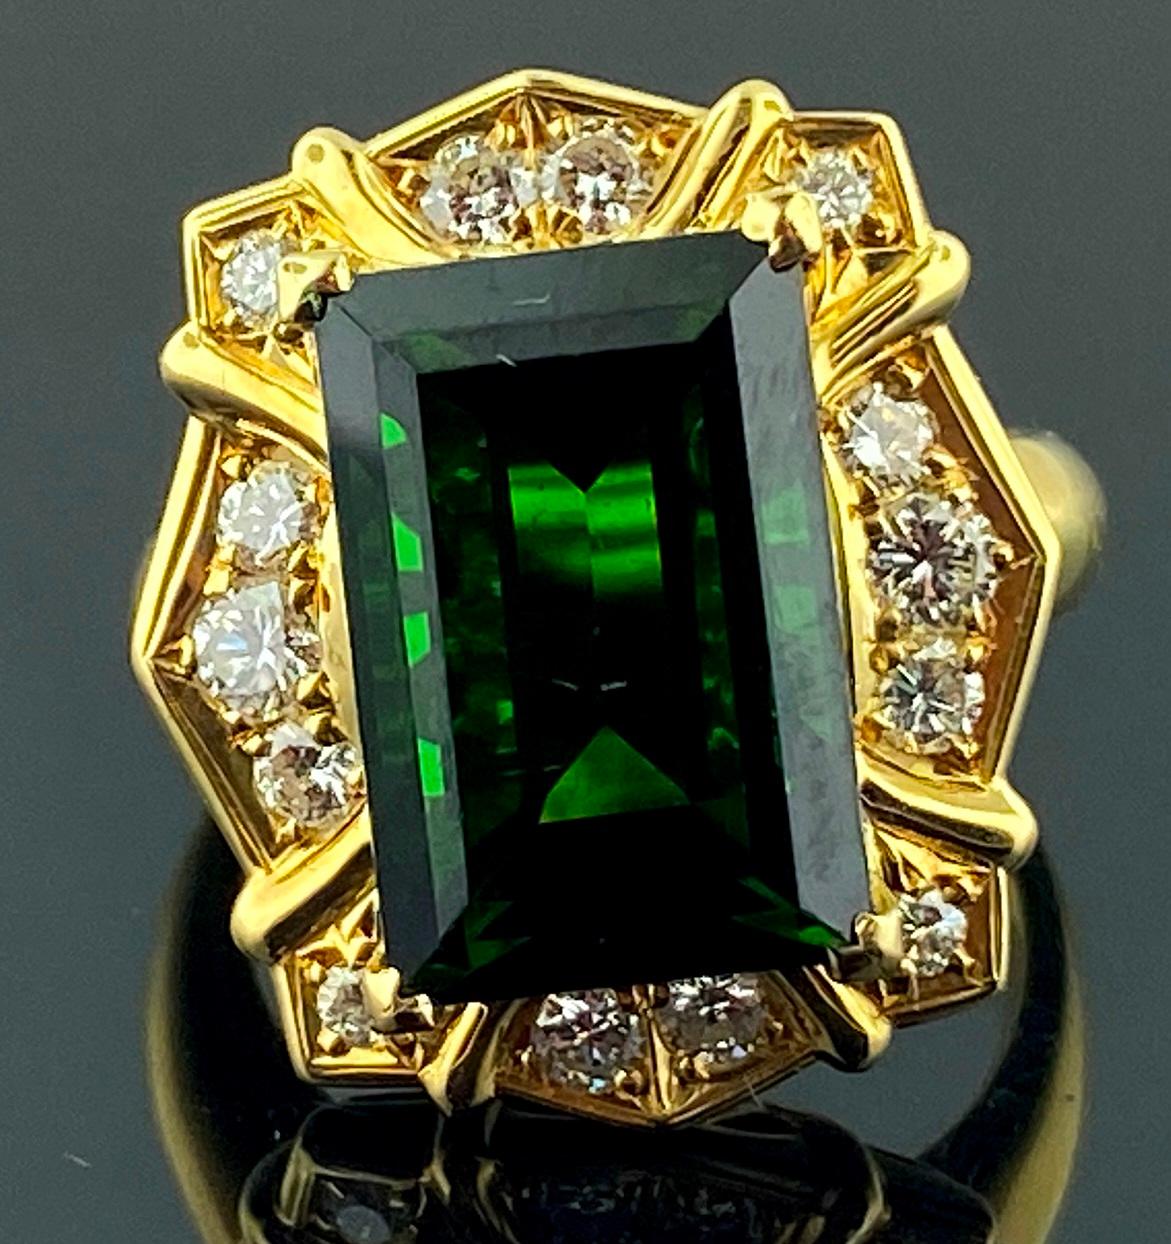 Set in 18 karat yellow gold is a 7.50 carat emerald cut Green Tourmaline center stone, with 14 round brilliant cut diamonds in the surrounding mounting.  Total diamond weight is o.61 carats.  Ring size is 6.25.